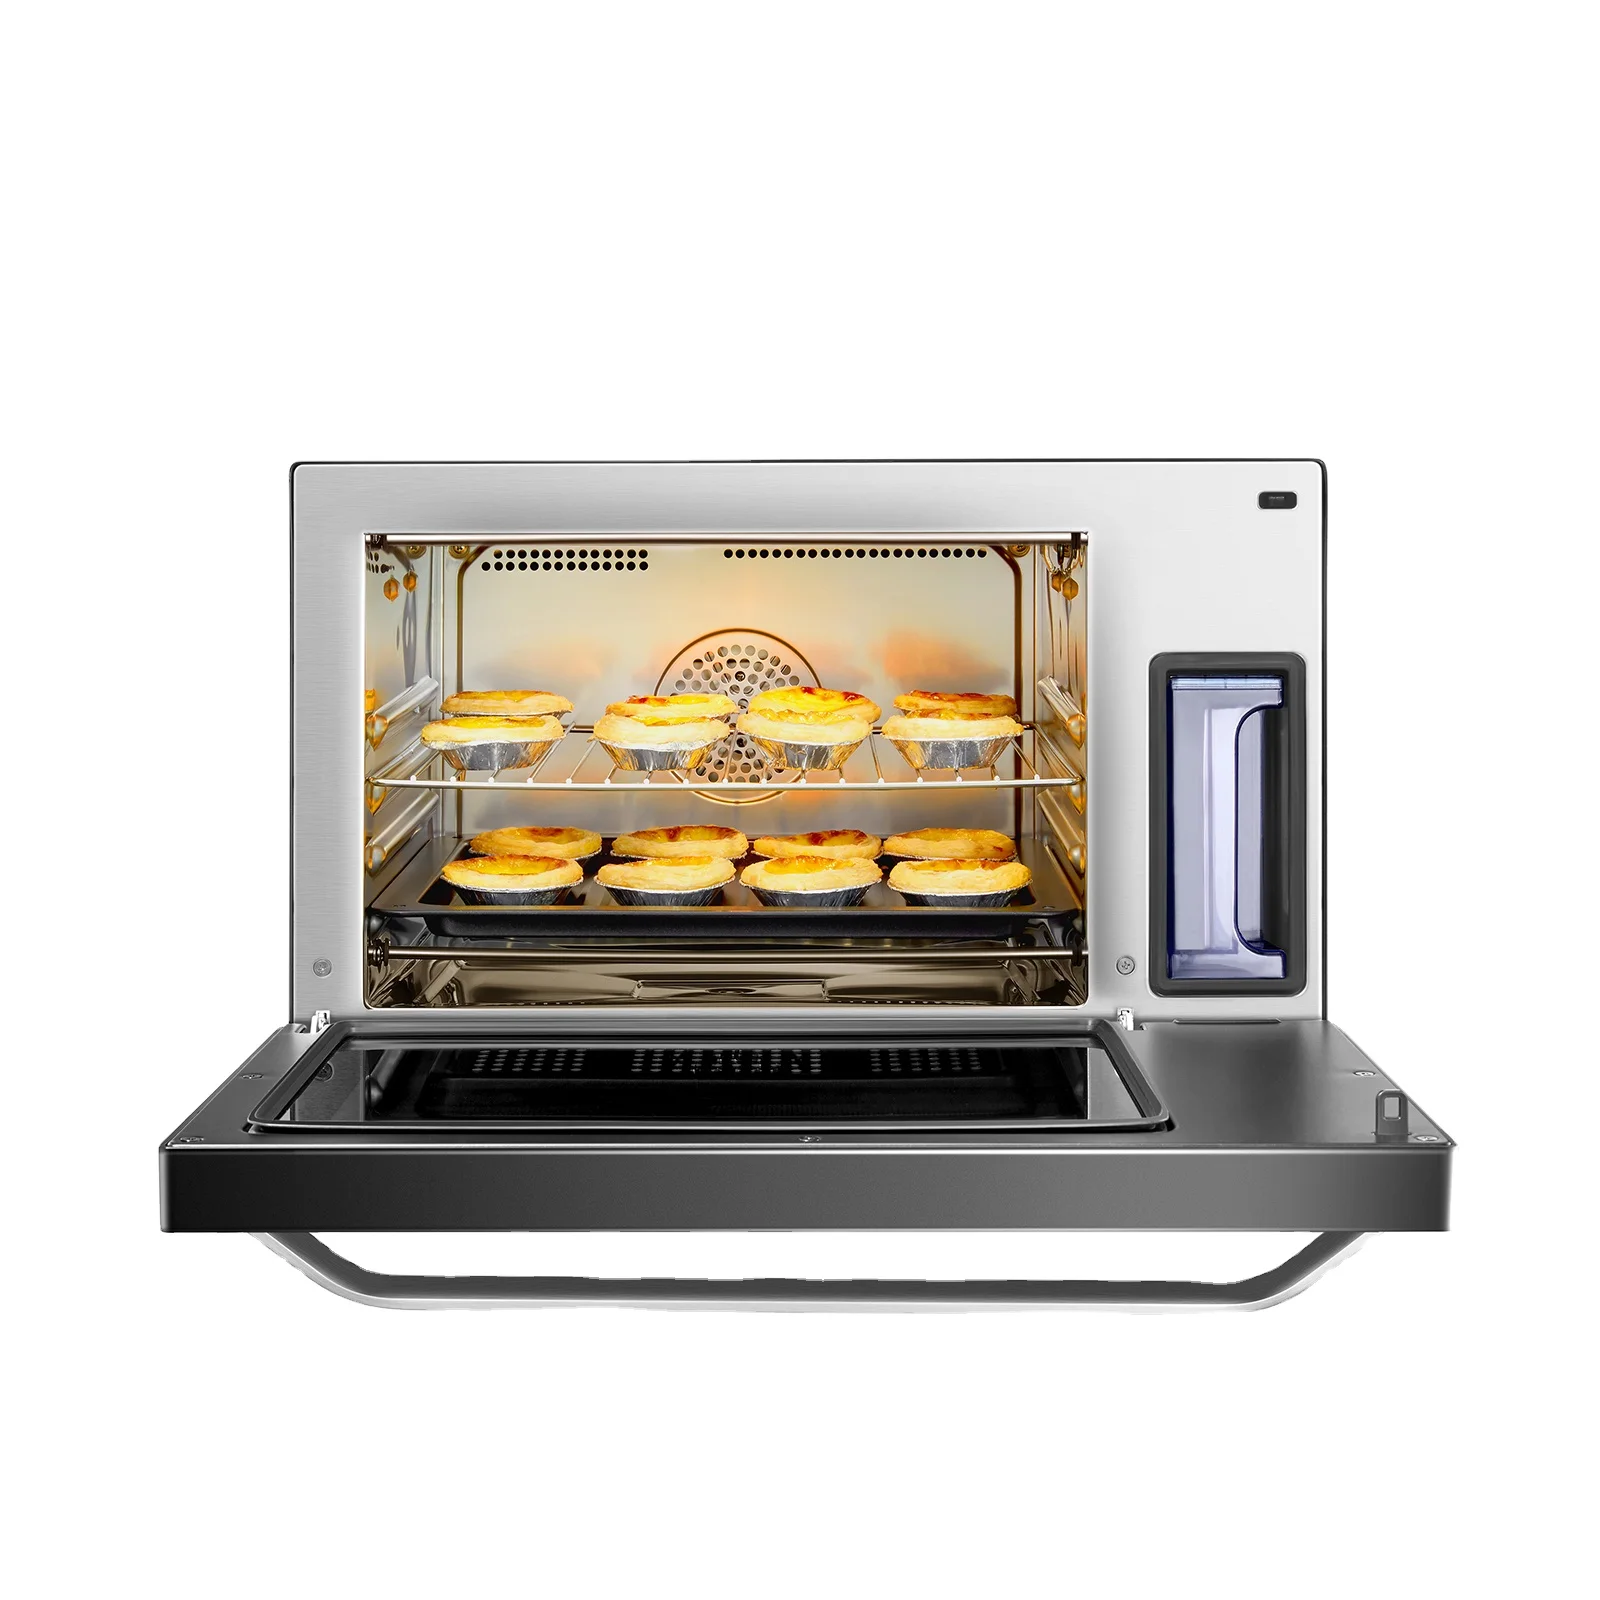 Electric ovens with steam фото 18